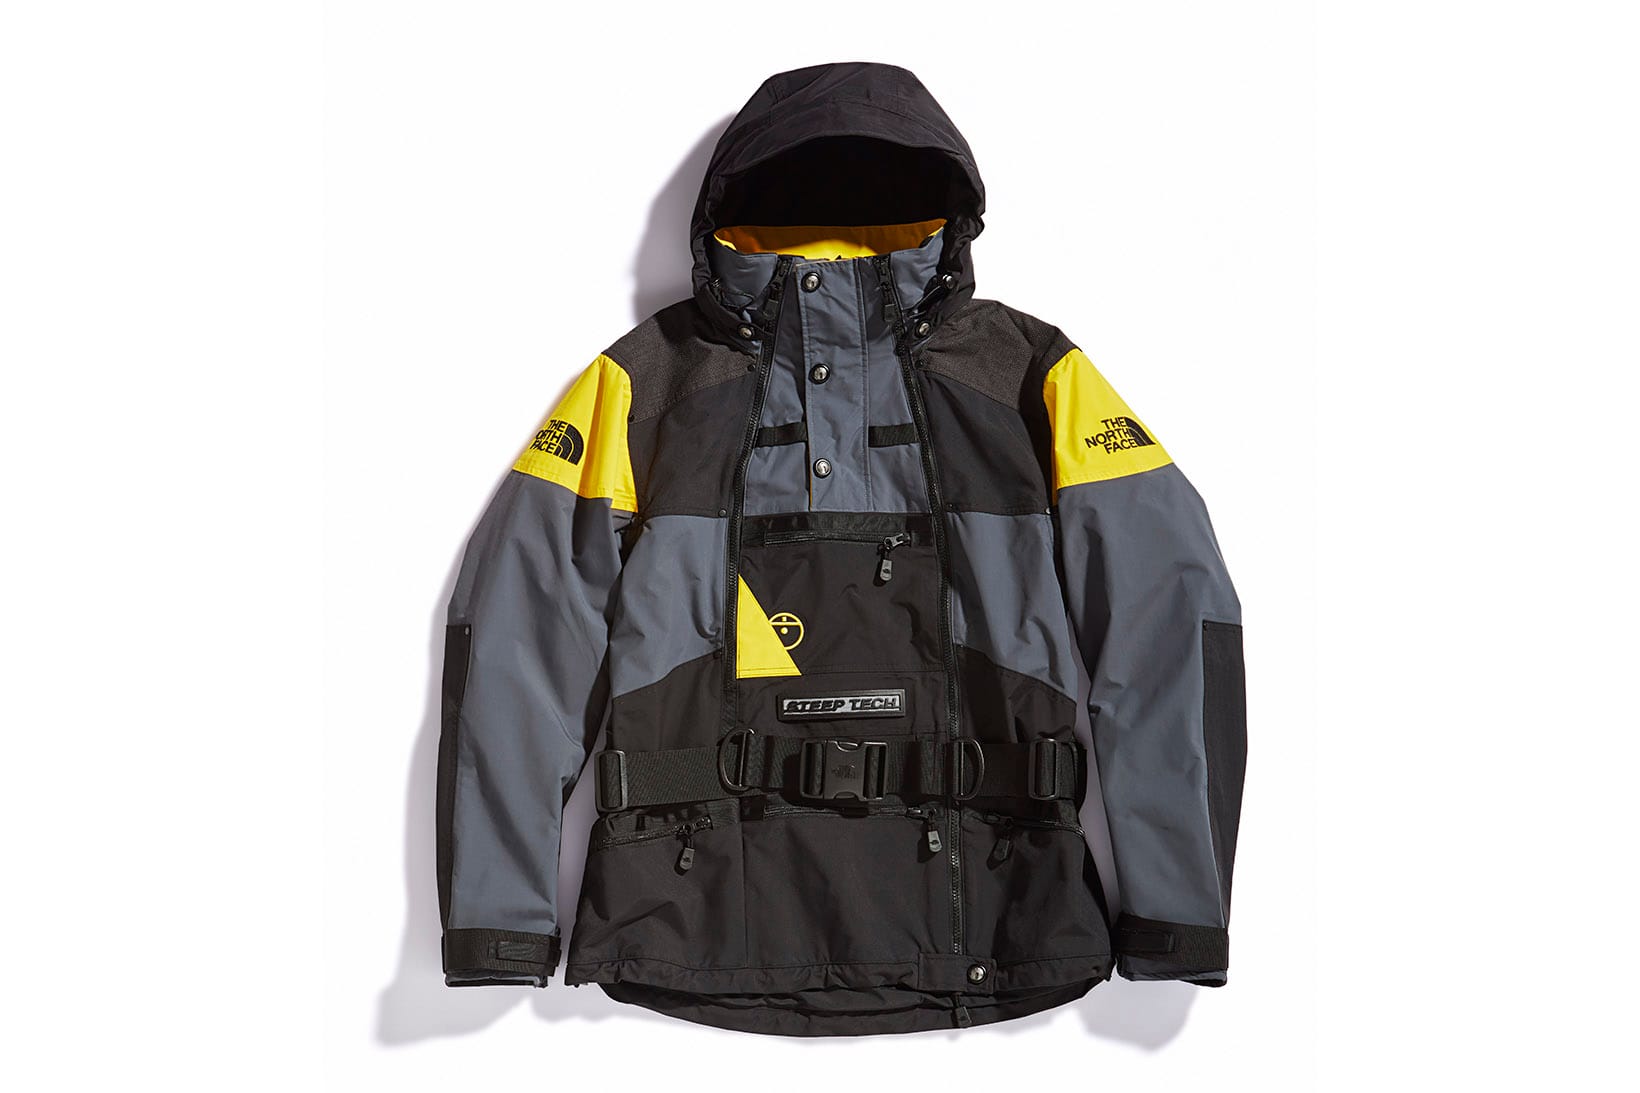 The North Face Reissues Steep Tech 